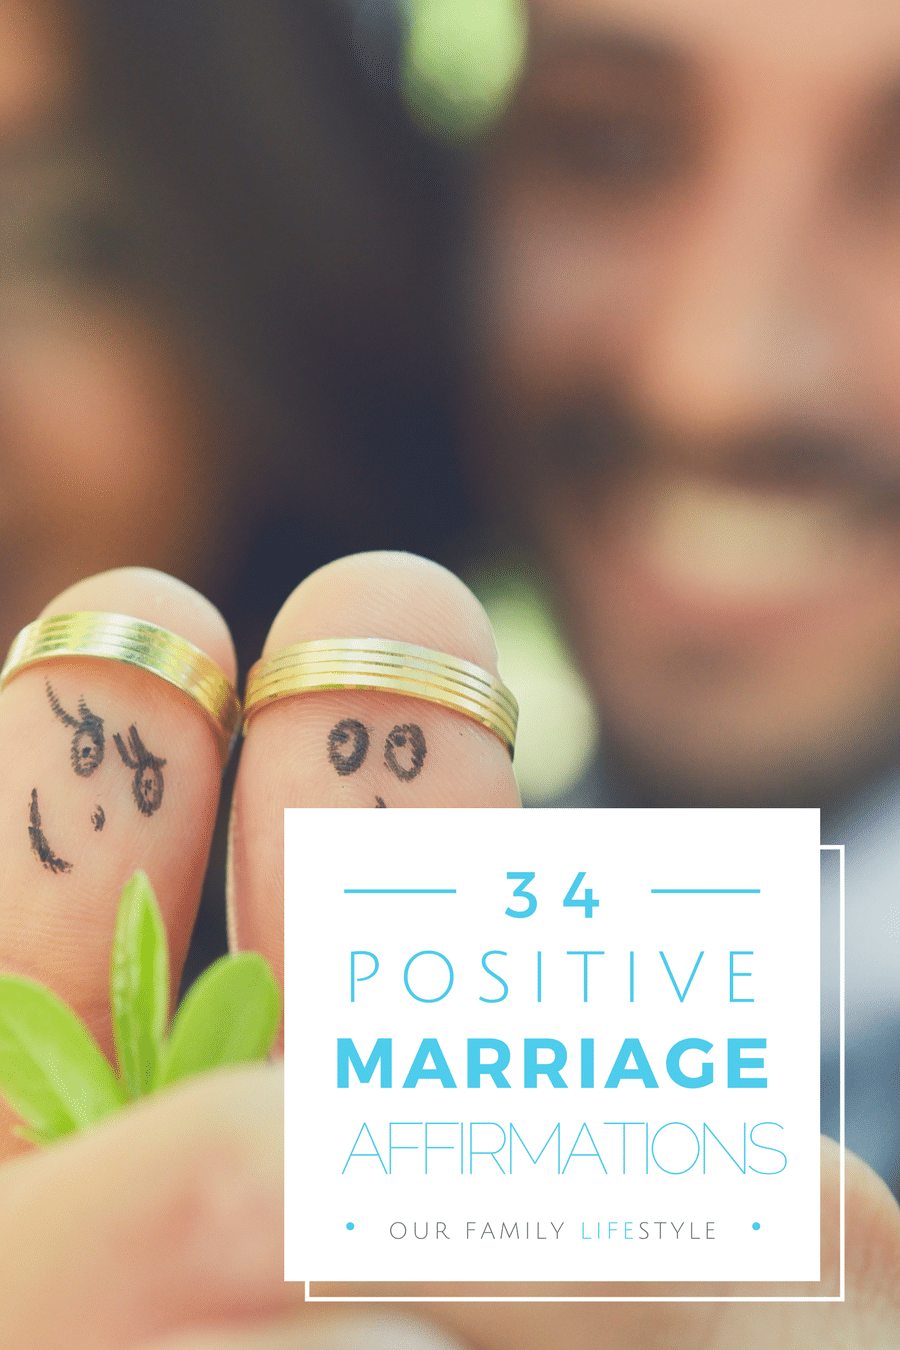 Positive Marriage Affirmations for couples